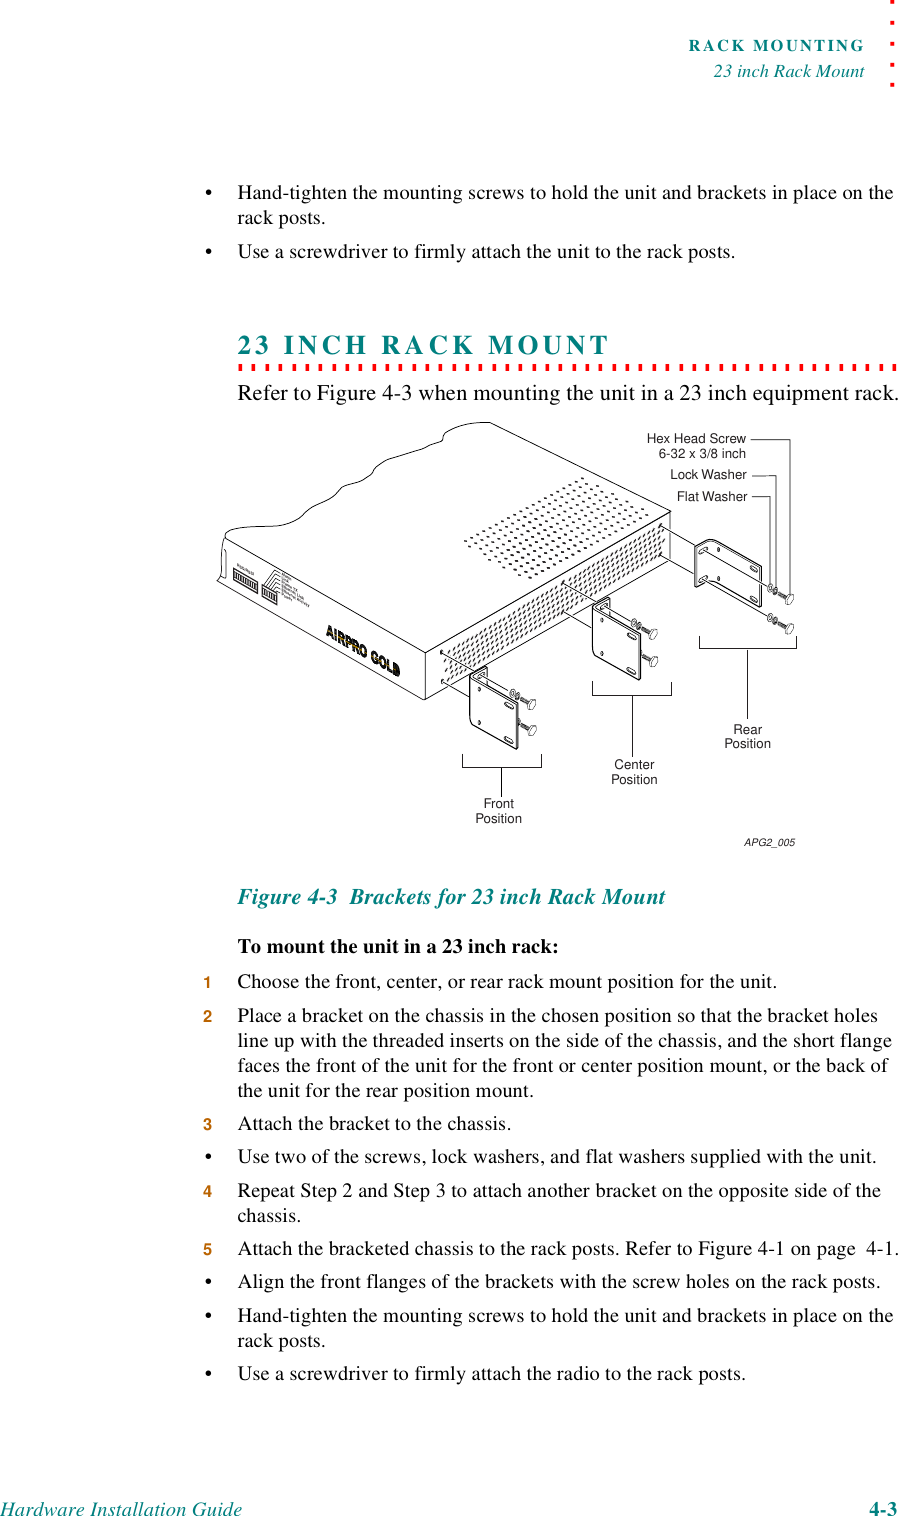 . . . . .RACK MOUNTING23 inch Rack MountHardware Installation Guide 4-3•Hand-tighten the mounting screws to hold the unit and brackets in place on the rack posts.•Use a screwdriver to firmly attach the unit to the rack posts.. . . . . . . . . . . . . . . . . . . . . . . . . . . . . . . . . . . . . . . . . . . . . . . . . . 23 INCH RACK MOUNTRefer to Figure 4-3 when mounting the unit in a 23 inch equipment rack.Figure 4-3  Brackets for 23 inch Rack MountTo mount the unit in a 23 inch rack:1Choose the front, center, or rear rack mount position for the unit.2Place a bracket on the chassis in the chosen position so that the bracket holes line up with the threaded inserts on the side of the chassis, and the short flange faces the front of the unit for the front or center position mount, or the back of the unit for the rear position mount.3Attach the bracket to the chassis.•Use two of the screws, lock washers, and flat washers supplied with the unit.4Repeat Step 2 and Step 3 to attach another bracket on the opposite side of the chassis.5Attach the bracketed chassis to the rack posts. Refer to Figure 4-1 on page  4-1.•Align the front flanges of the brackets with the screw holes on the rack posts.•Hand-tighten the mounting screws to hold the unit and brackets in place on the rack posts.•Use a screwdriver to firmly attach the radio to the rack posts.FrontPositionCenterPositionRearPositionFlat WasherLock WasherHex Head Screw 6-32 x 3/8 inchAPG2_005RSQ/RSSIAlarmLinkFrame TXEthernet LinkEthernet ActivityPower